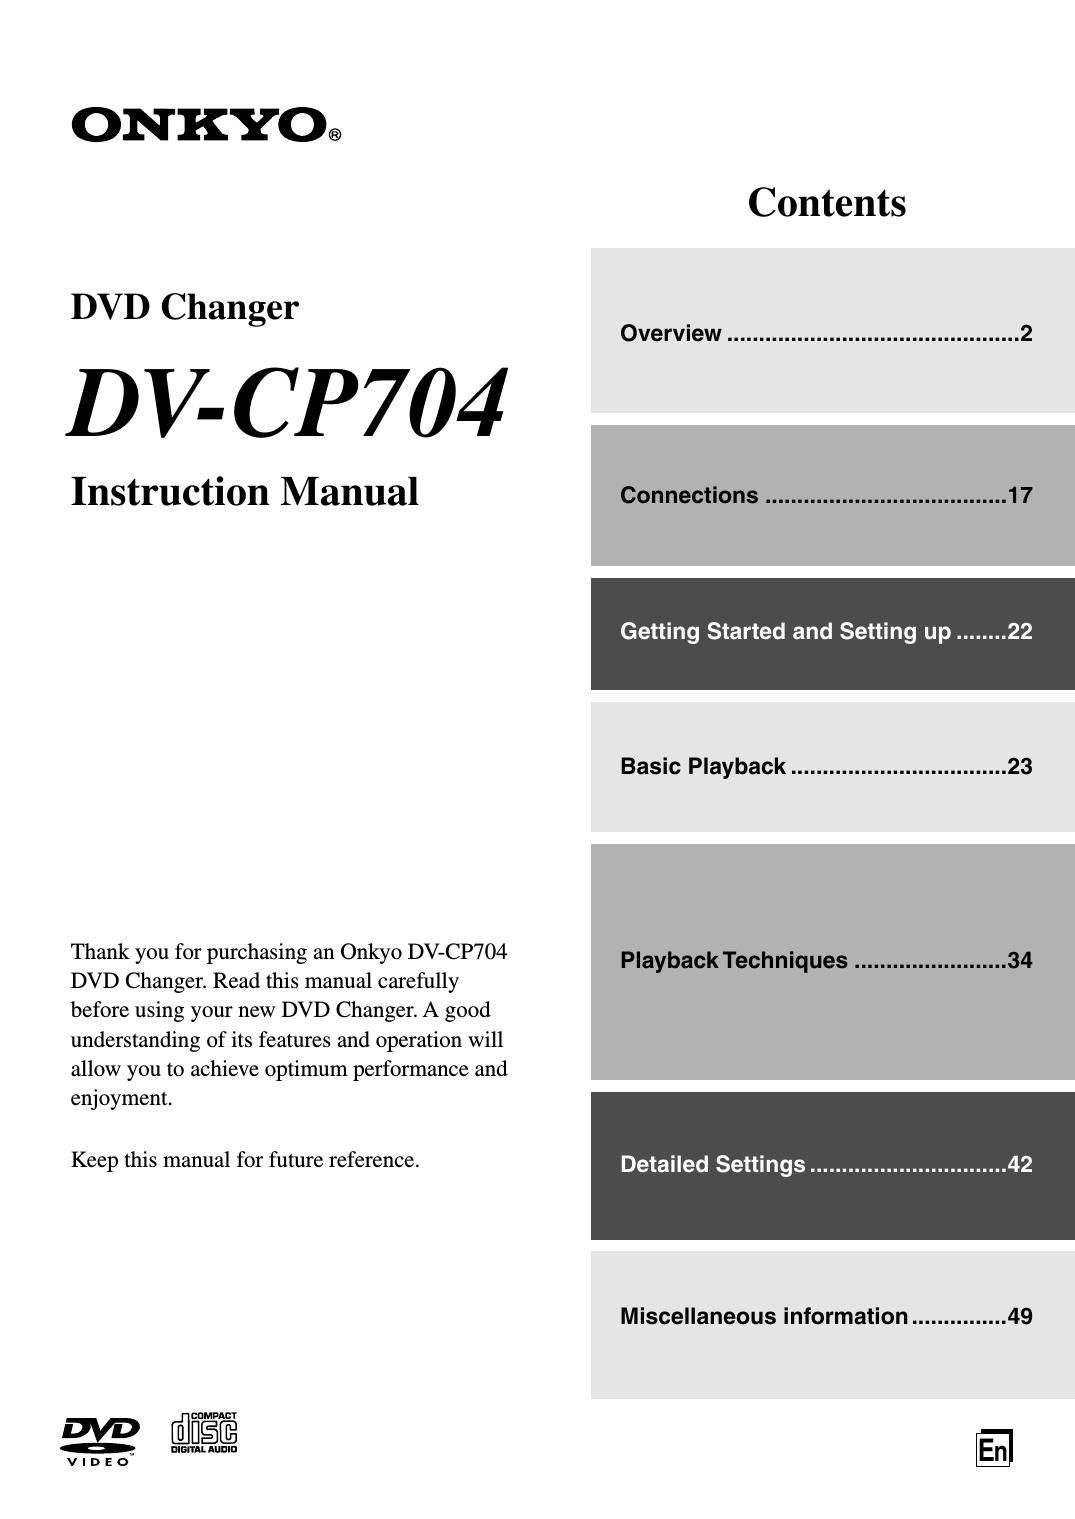 Onkyo DVCP 704 Owners Manual